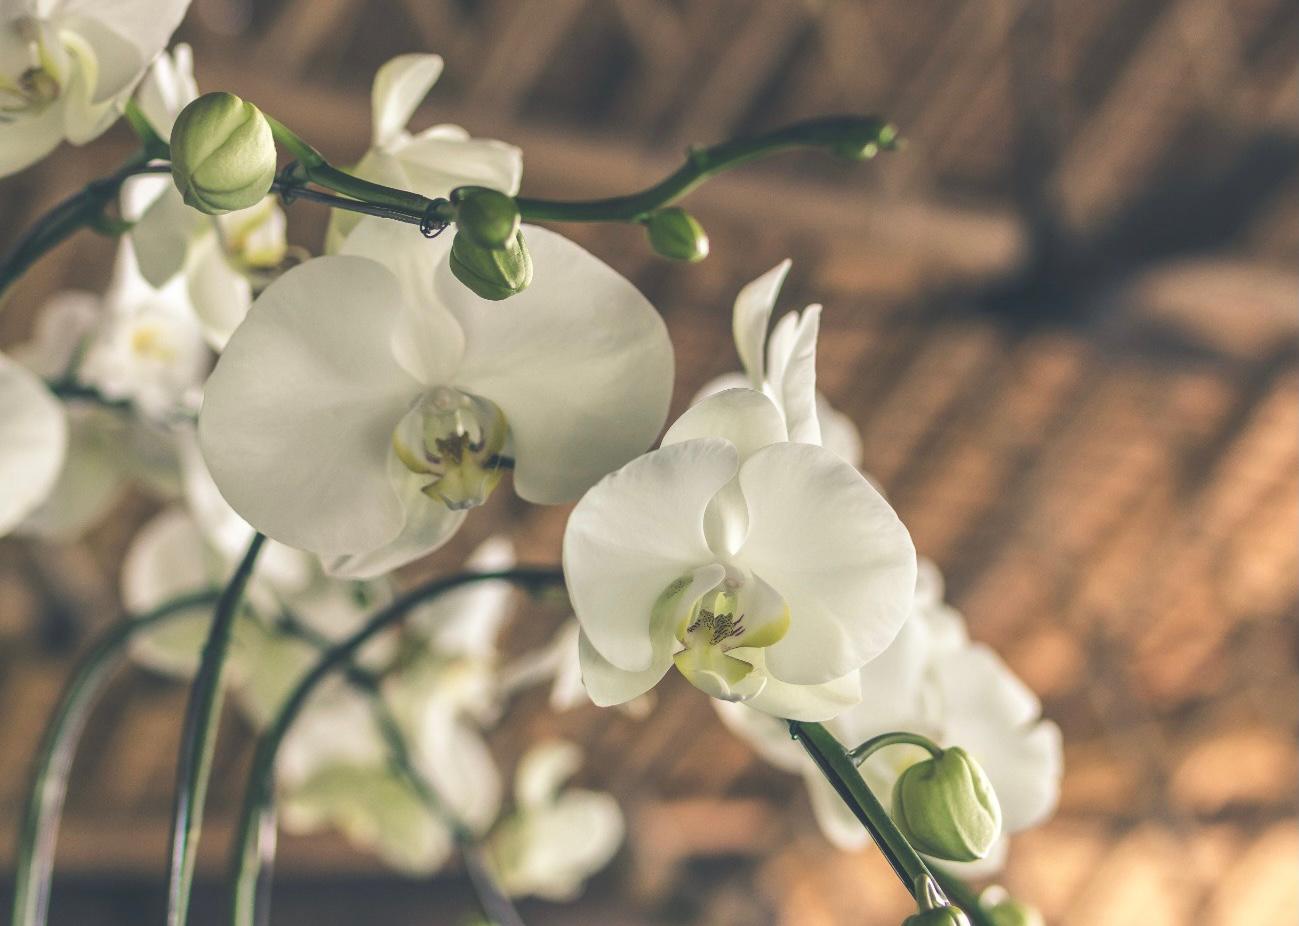 MAJESTIC FLOWERS: A FEW THINGS WE KNOW ABOUT ORCHIDS